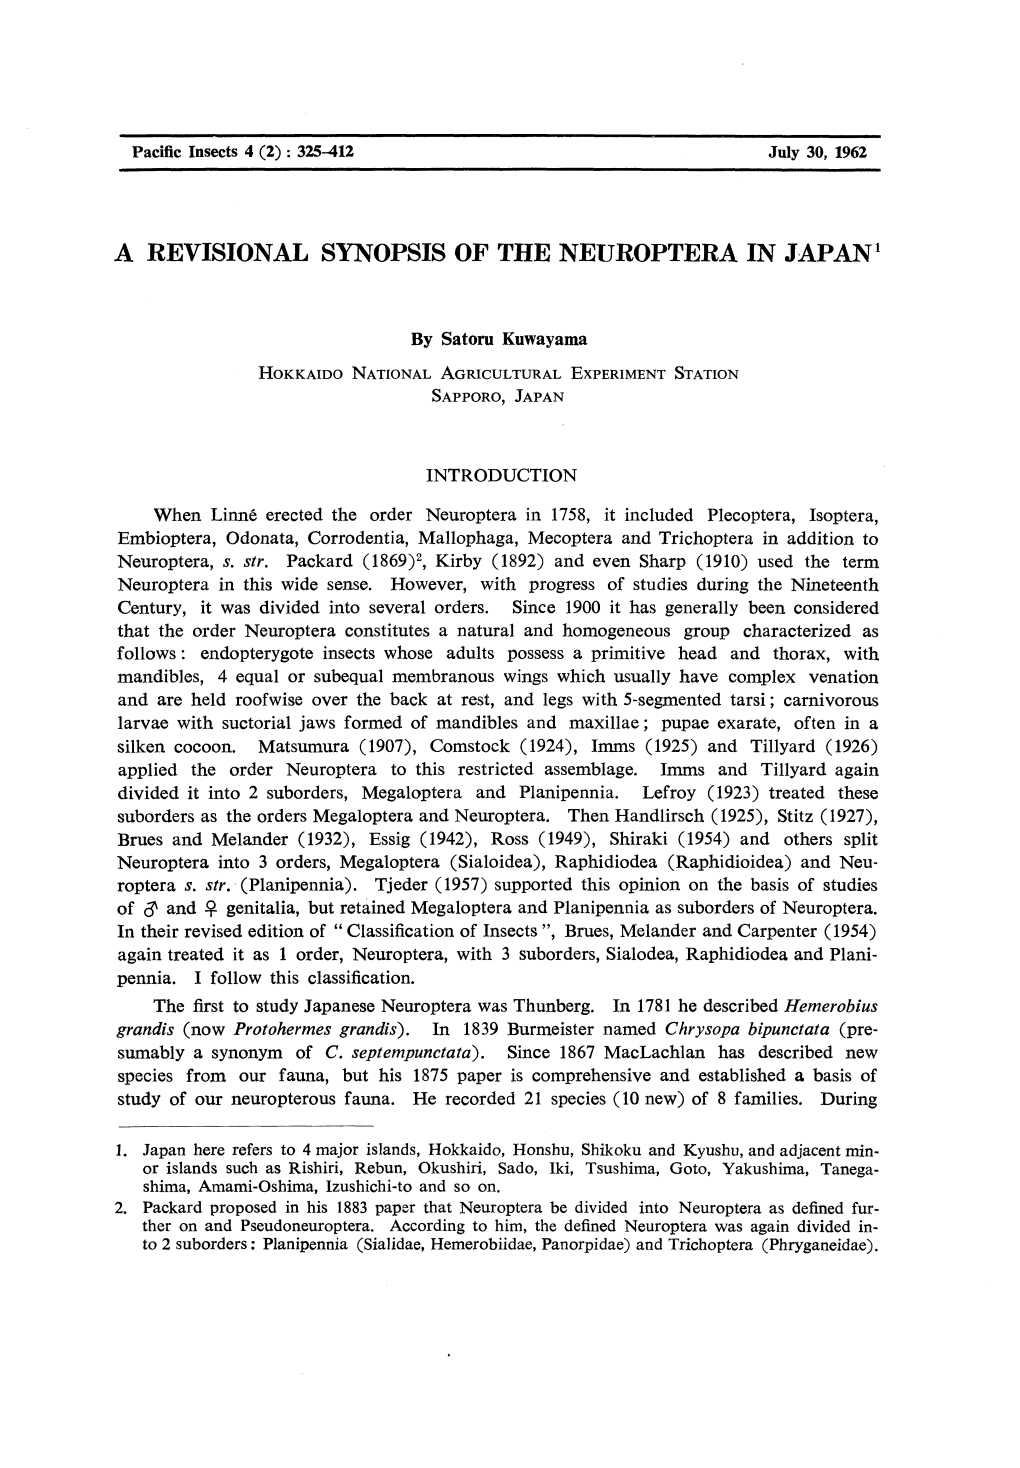 A Revisional Synopsis of the Neuroptera in Japan1